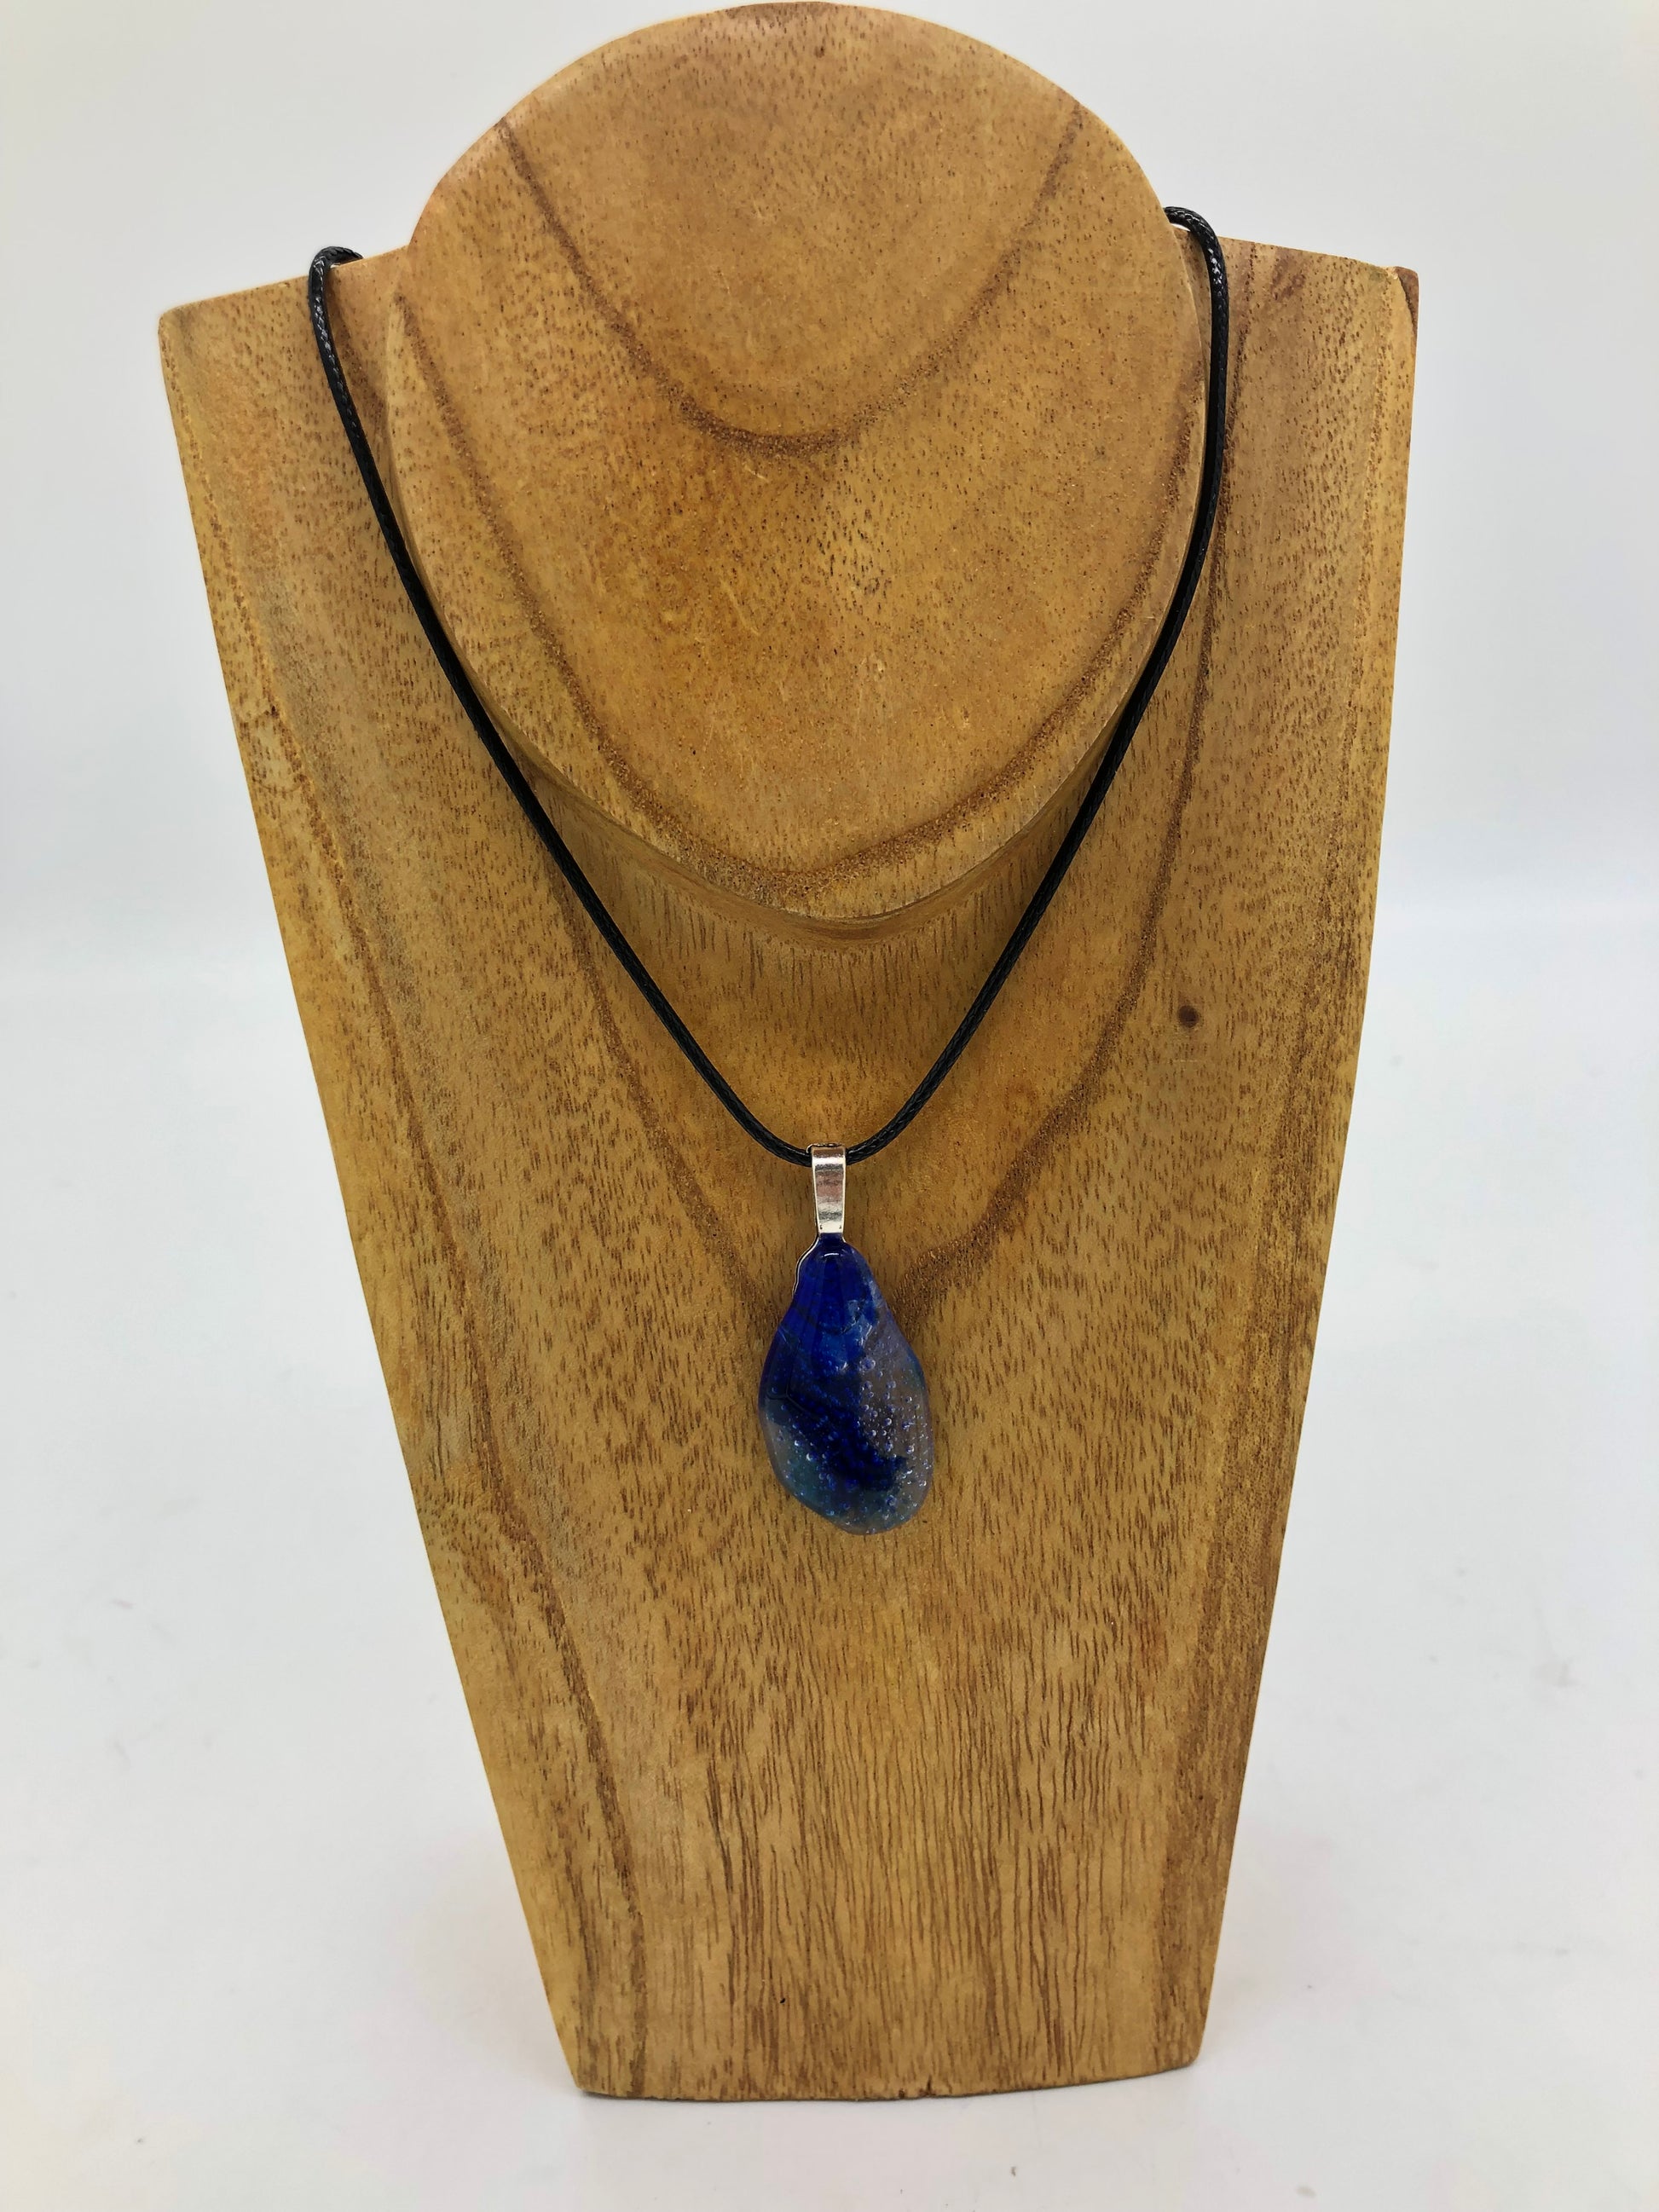 Fused glass necklace on a black cord, displayed on wooden holder.  Necklace design is a elongated freeform oval in blues and clear